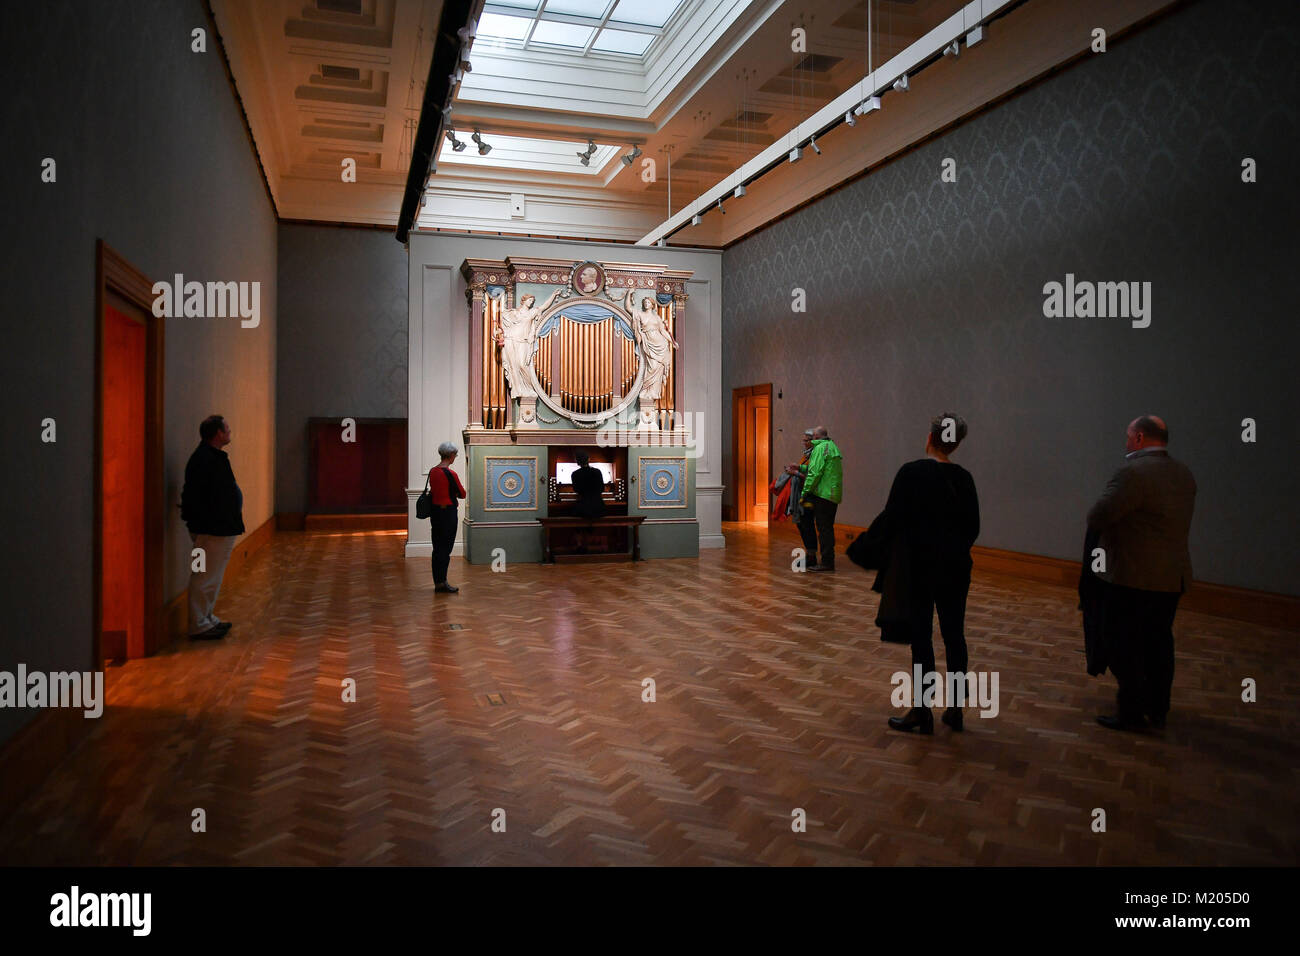 An organist performs &Ograve;Il Cielo In Una Stanza&Oacute; (The Sky in a Room) on the 1774 Sir Watkins Williams Wynn organ in the National Museum Wales&Otilde; 18th century British art gallery as part of an exhibition by artist Ragnar Kjartansson, titled 'The Sky in a Room', which sees a series of revolving organists constantly play across a five-week period, for five hours a day running from 3 February to 11 March. Stock Photo